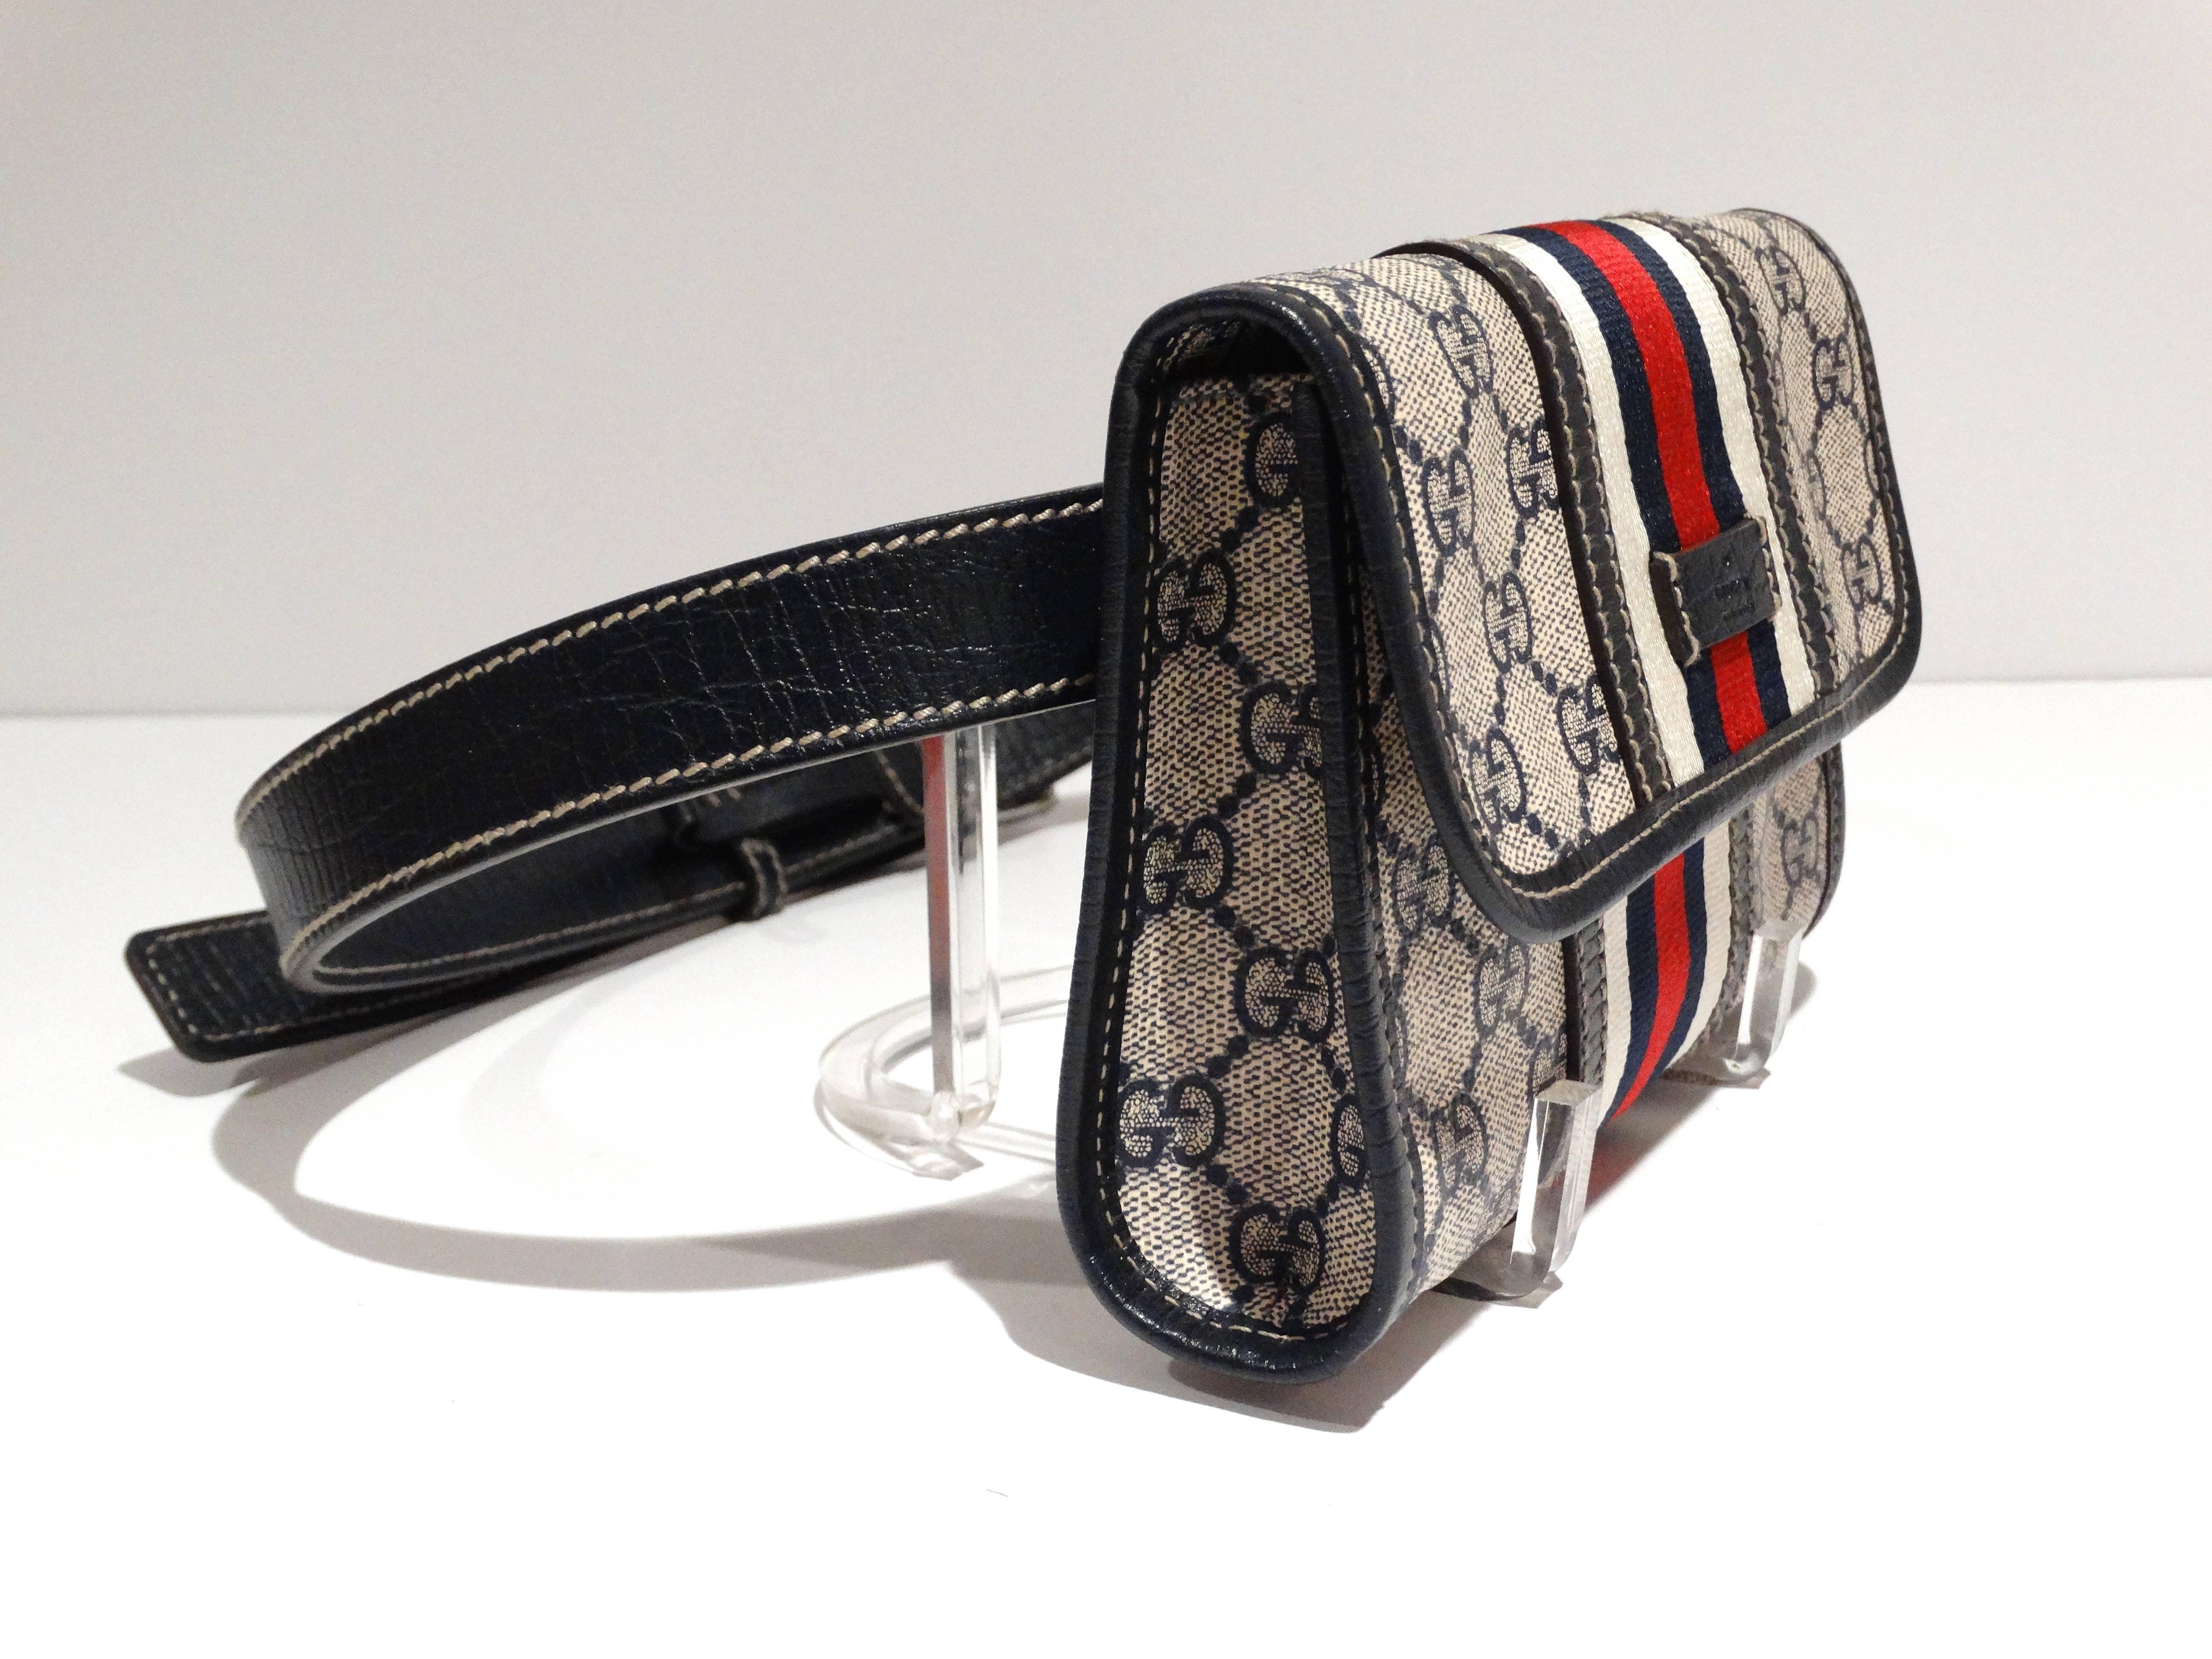 Rare 1980s classic Gucci fanny-waist pack with leather belt. This super chic fanny pack bag is crafted of coated Gucci GG blue on white monogram coated canvas with navy blue leather trim and a long adjustable waist belt strap with silver hardware.